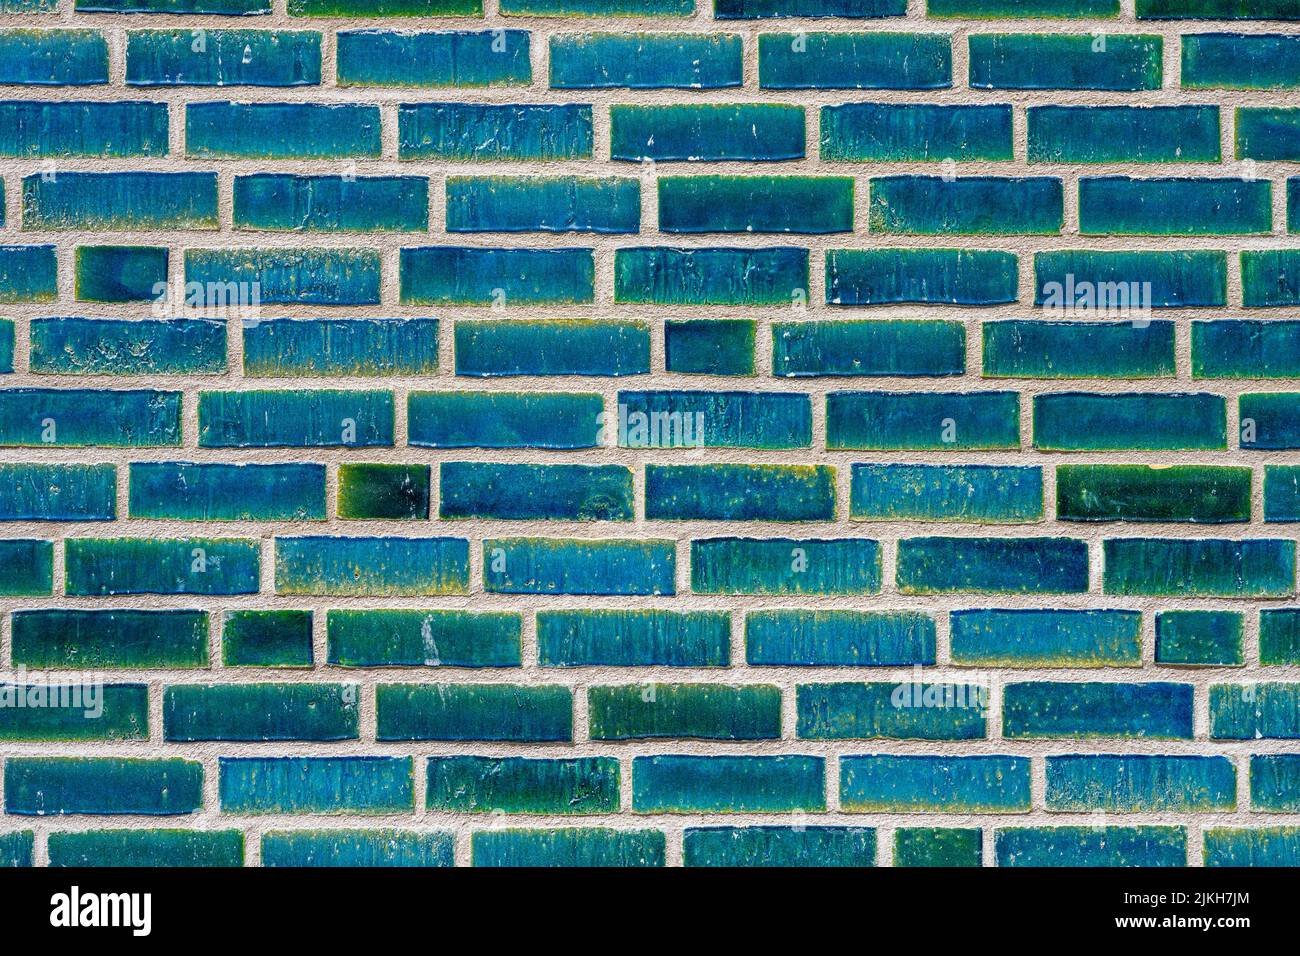 Background from a wall made of turquoise bricks Stock Photo